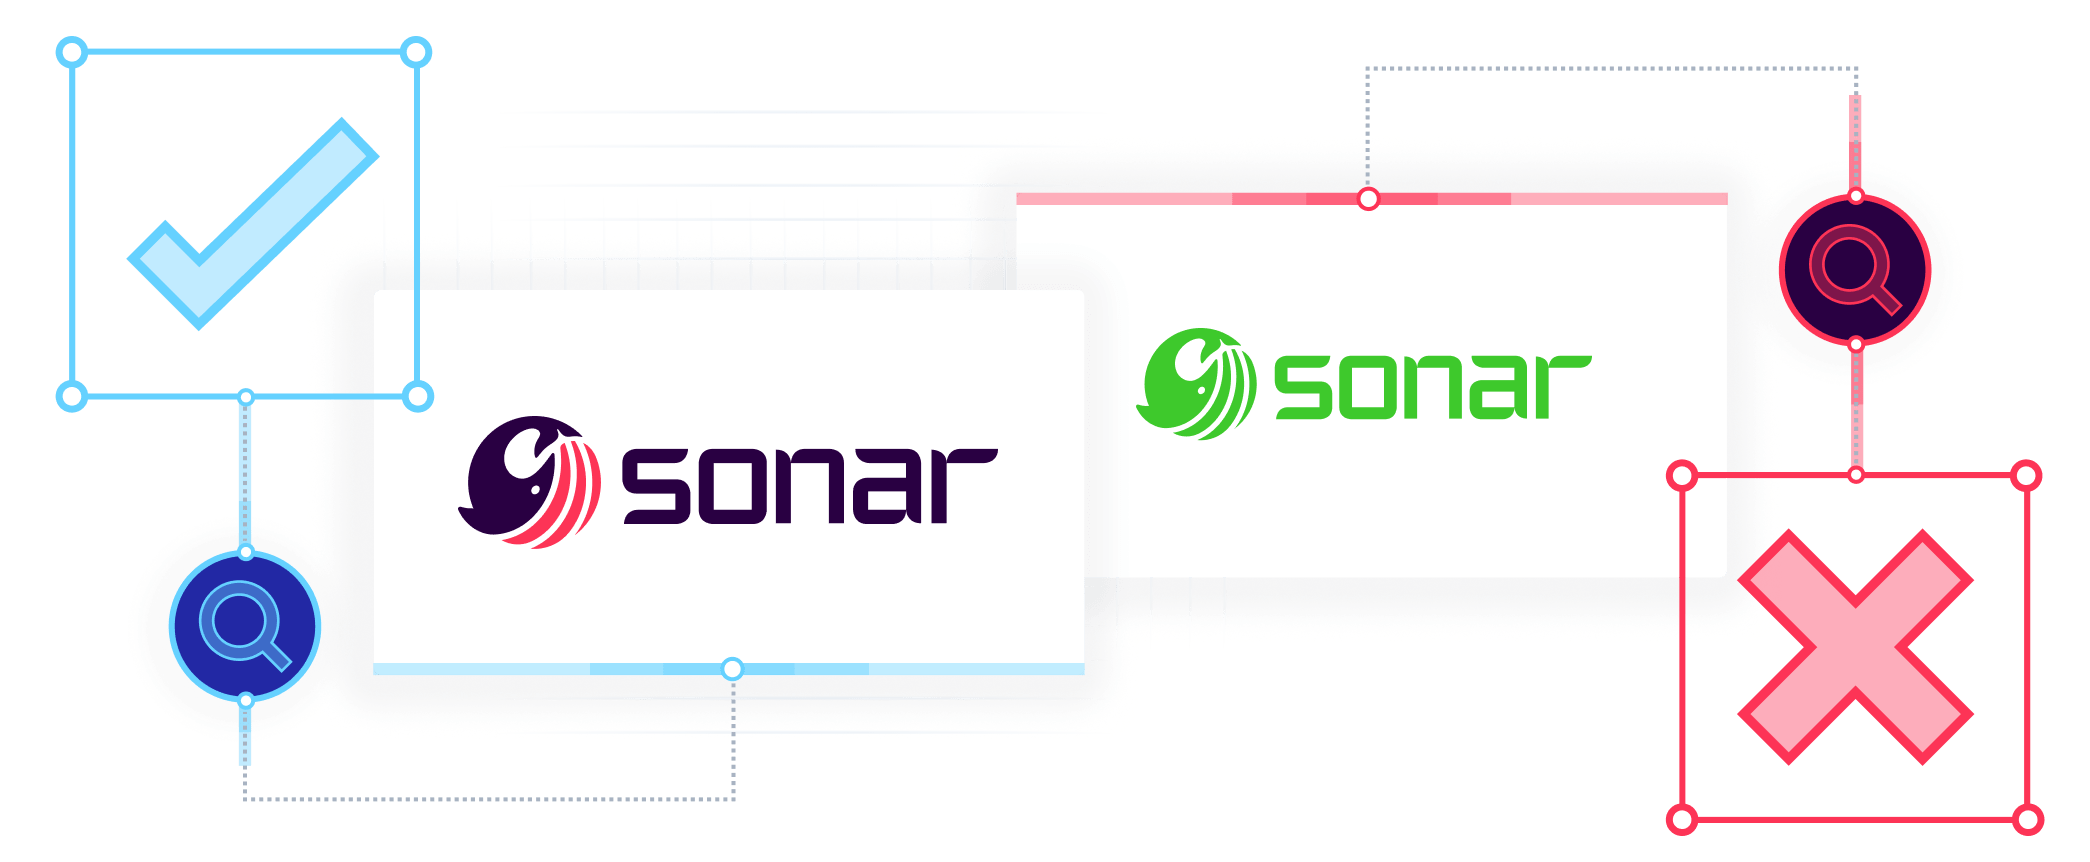 Example of the Sonar logo being used properly and one that has been modified to a different color which goes against the Sonar brand